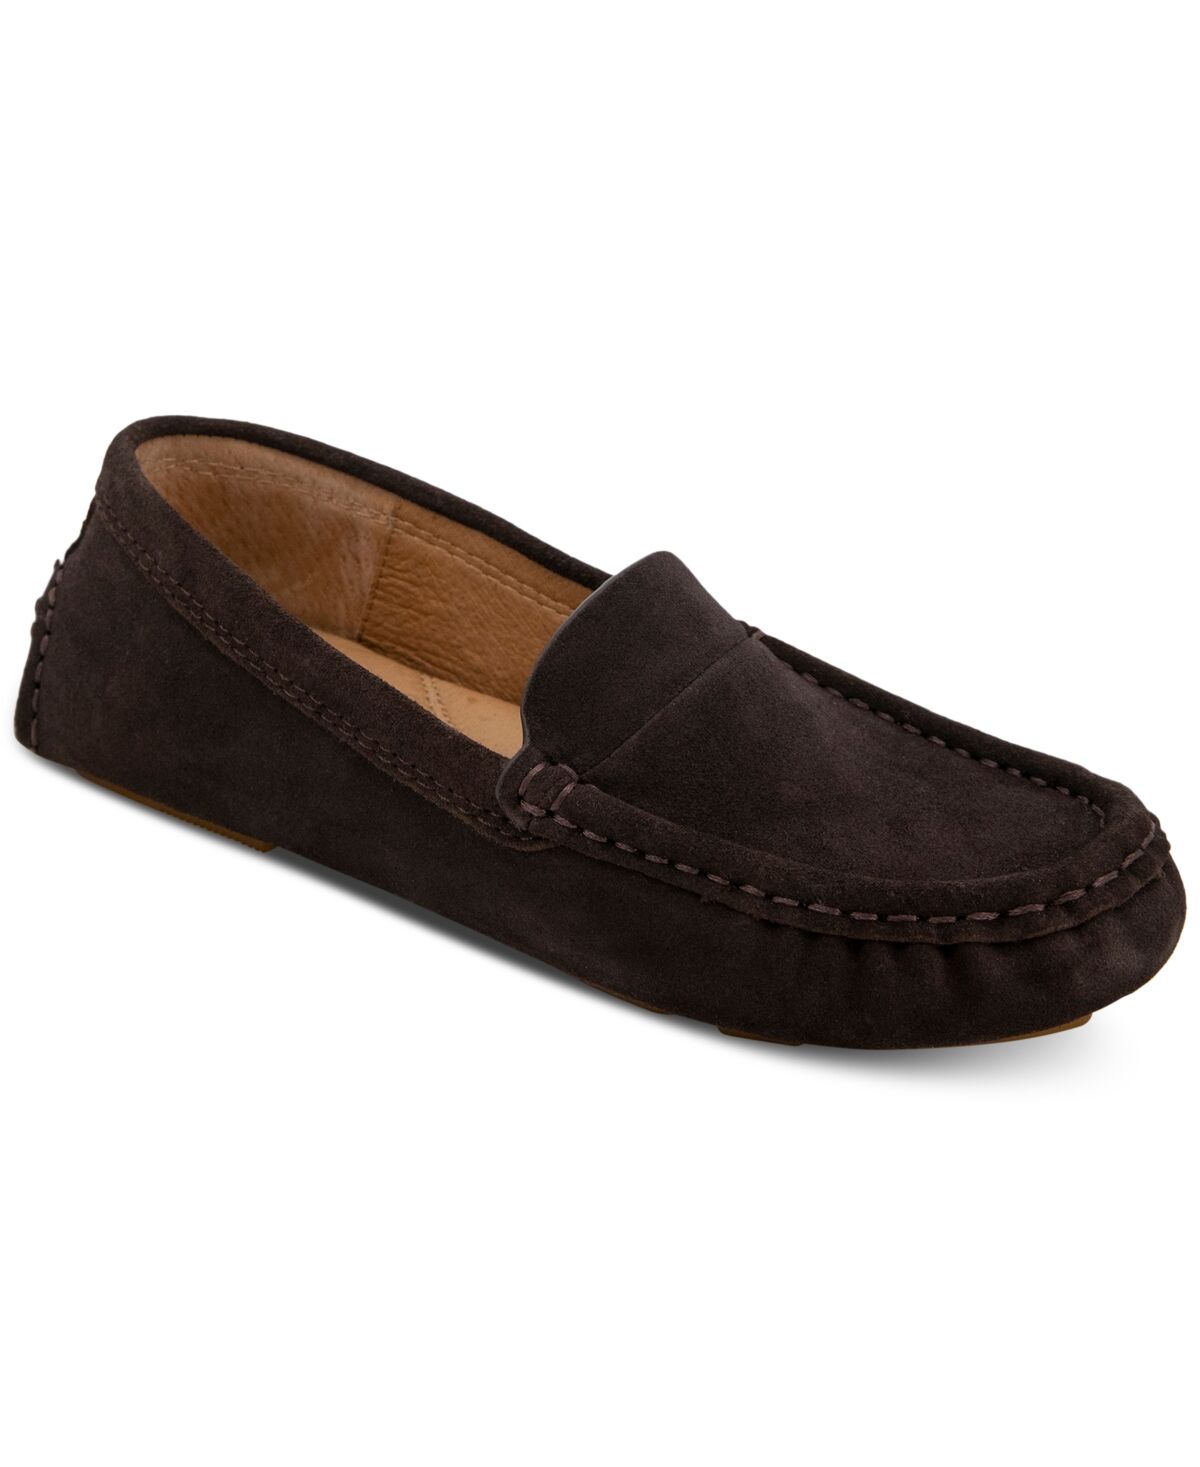 Gentle Souls Women's Mina Driving Loafer Flats - Chocolate